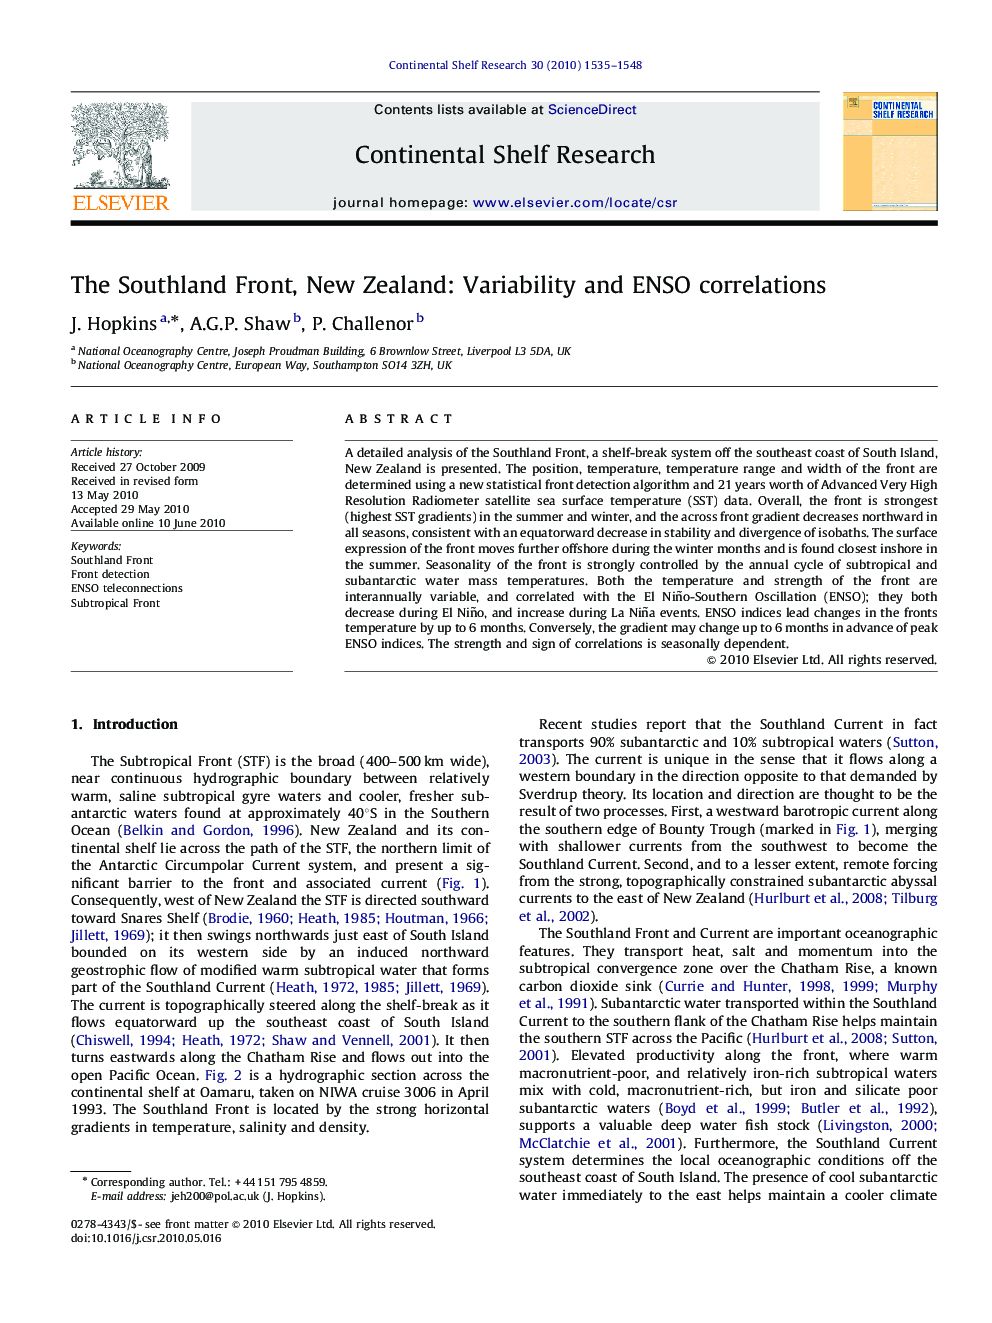 The Southland Front, New Zealand: Variability and ENSO correlations